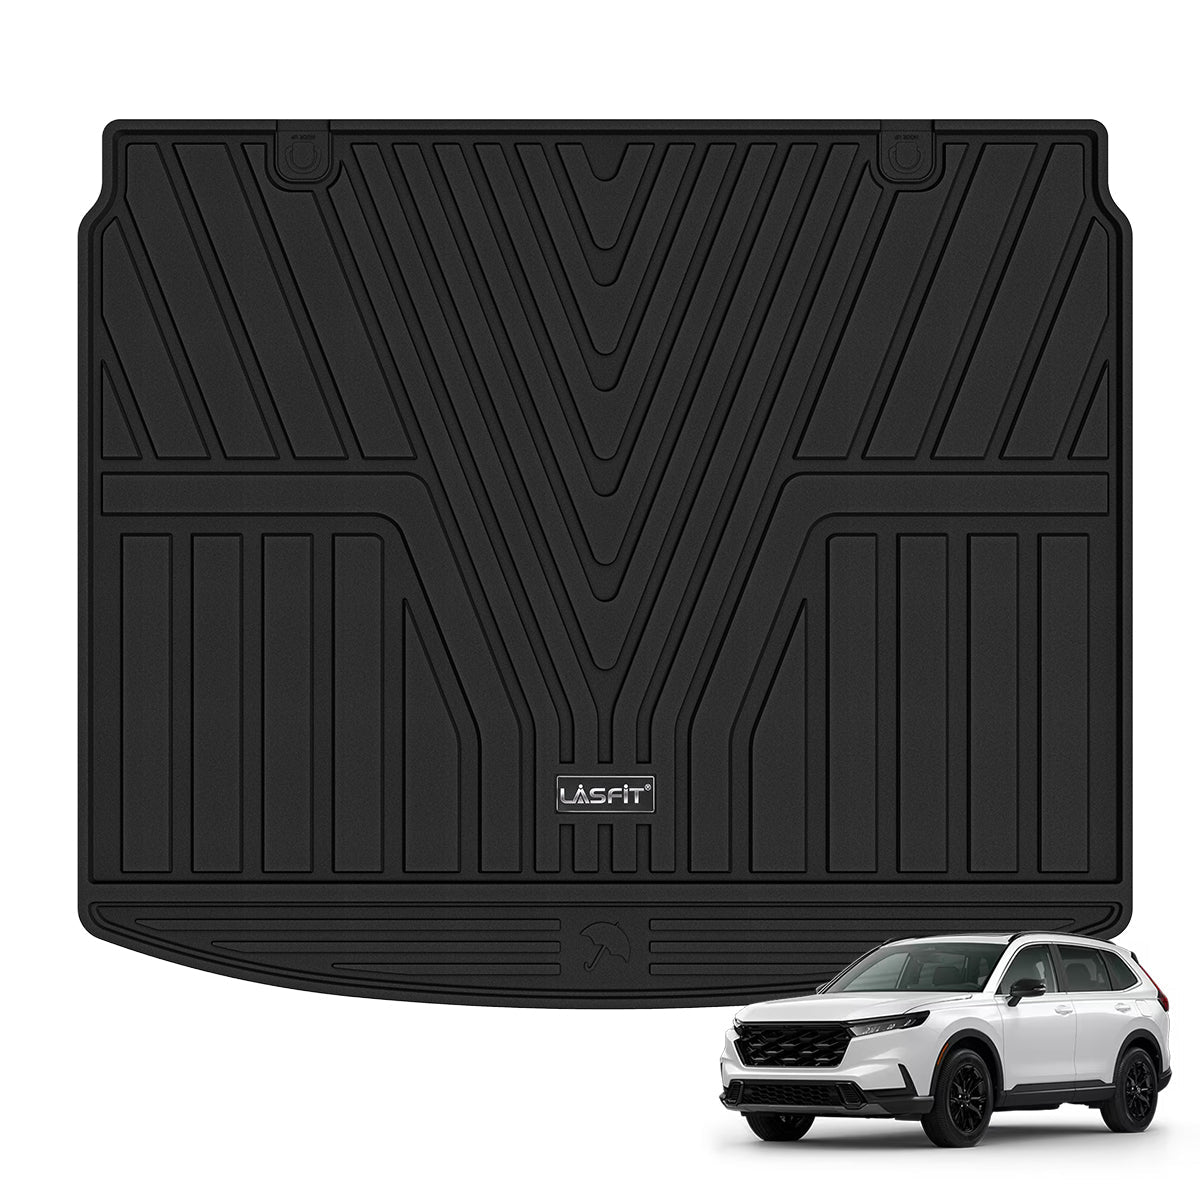 For Family SUV – LASFIT LINERS